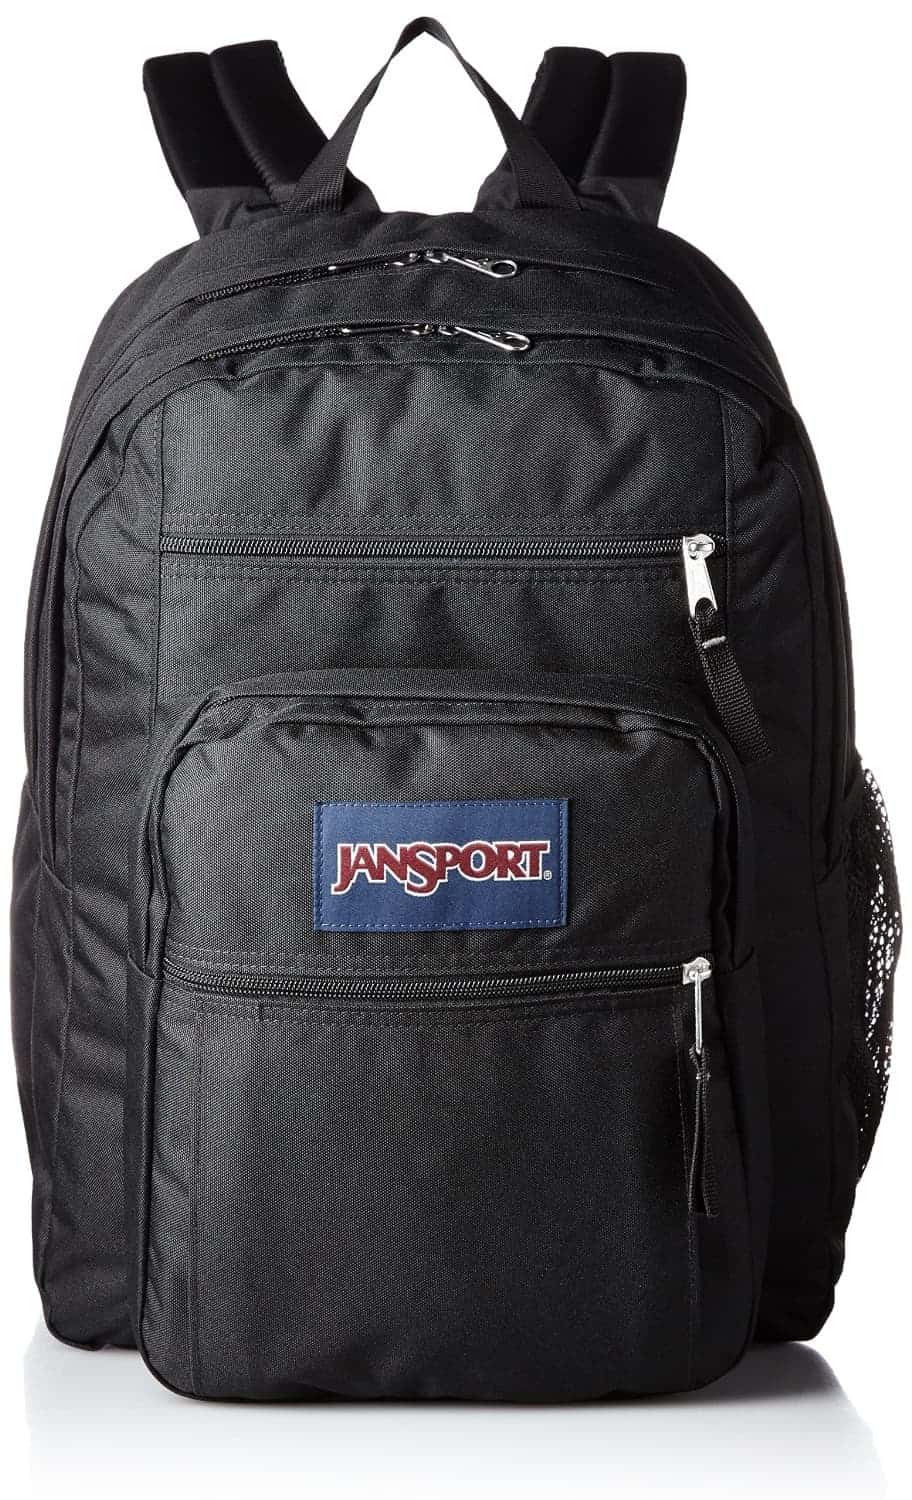 Top 15 Best Backpacks For High School In 2018 - The Rate Inc